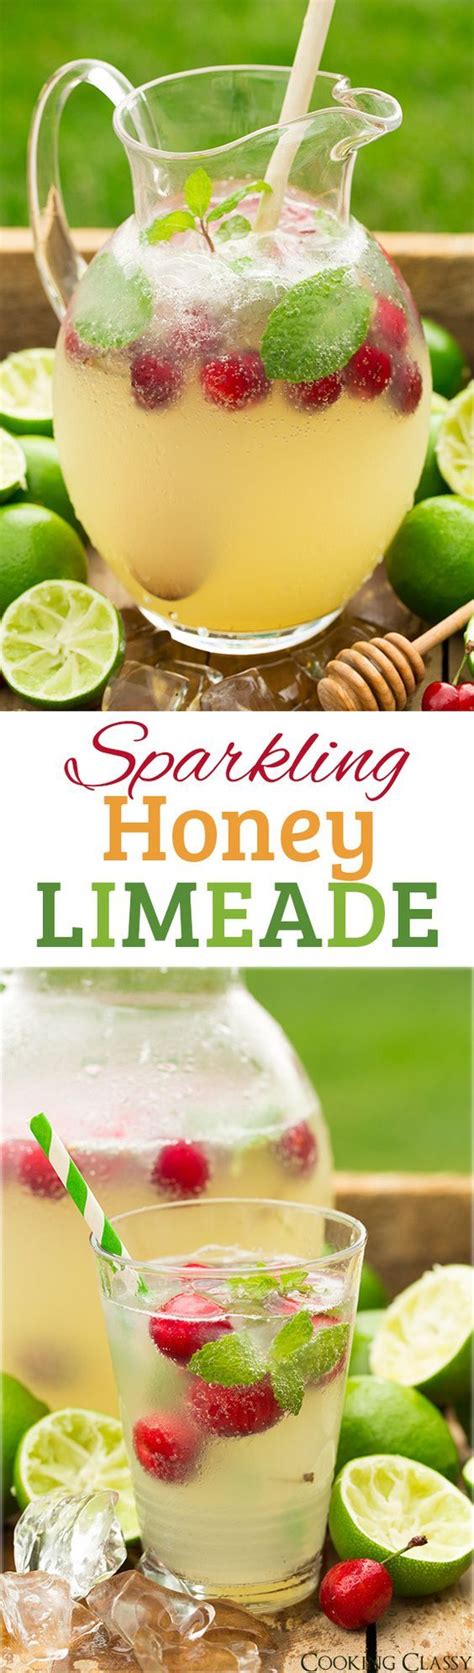 How to make alcoholic cherry limeade. Sparkling Honey Limeade - Cooking Classy | Drinks alcohol ...